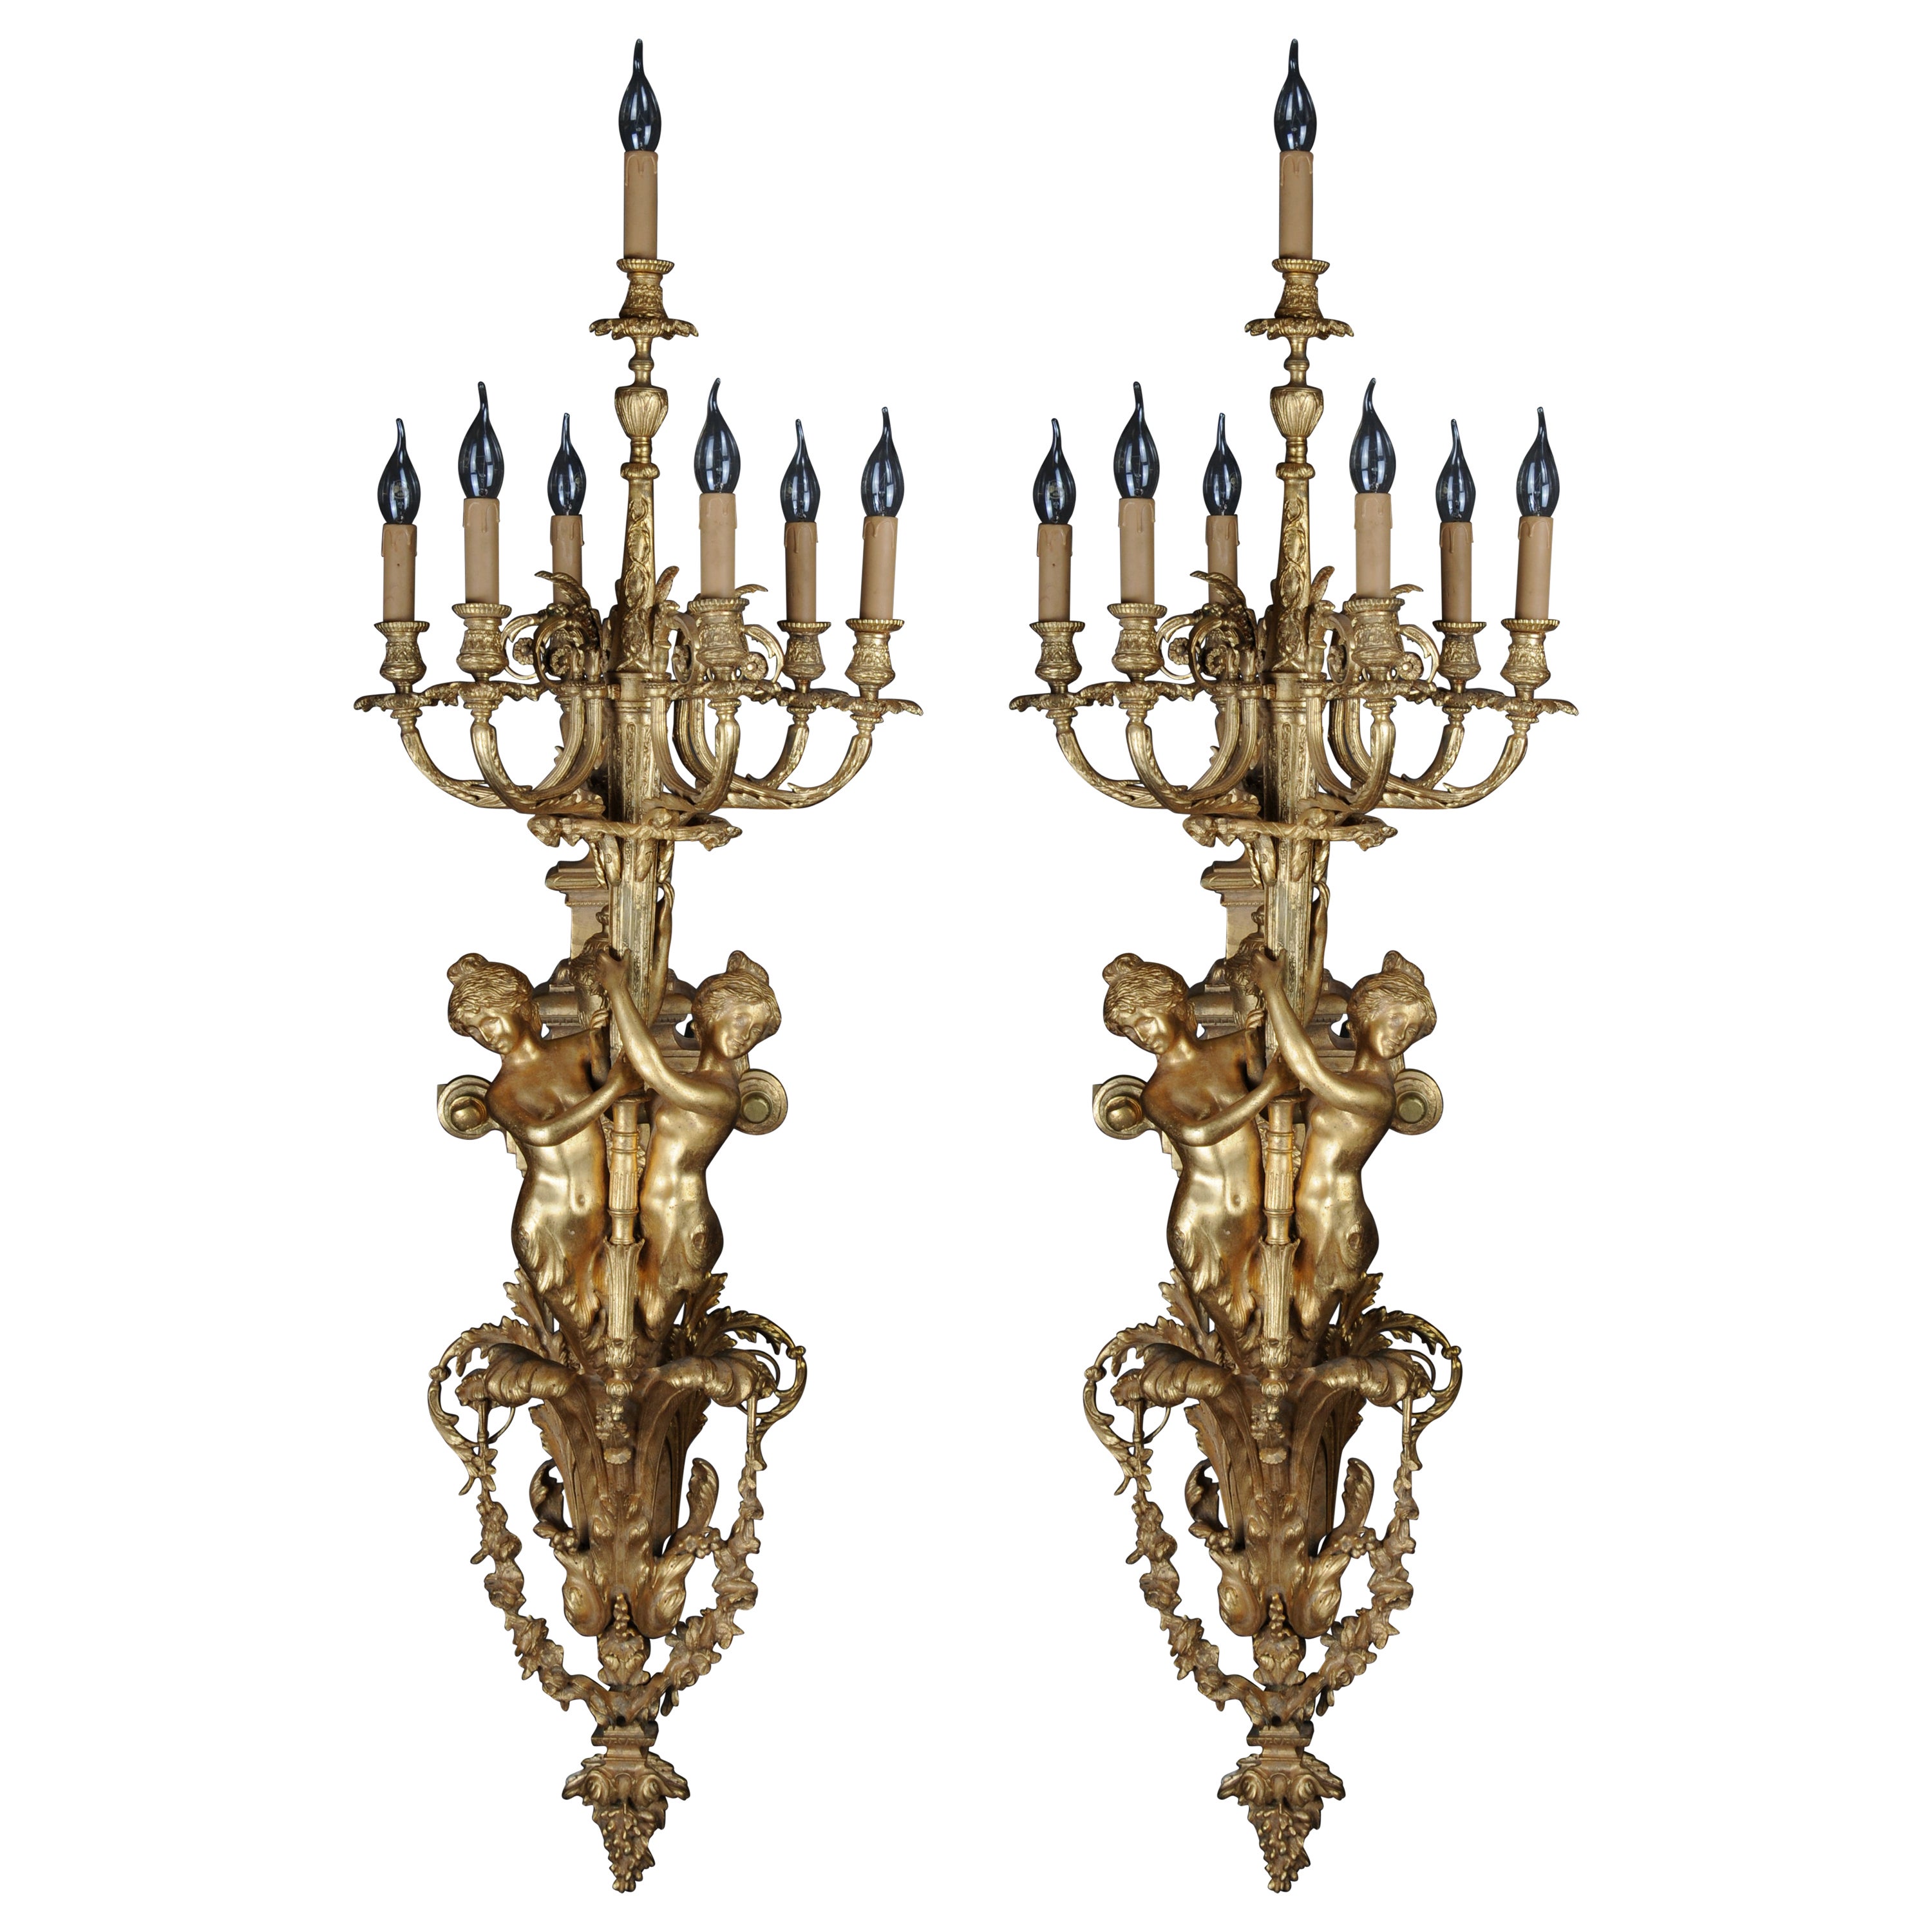 Pair (2) of Monumental Wall Sconce/Lamp Appliques Napoleon III For Sale